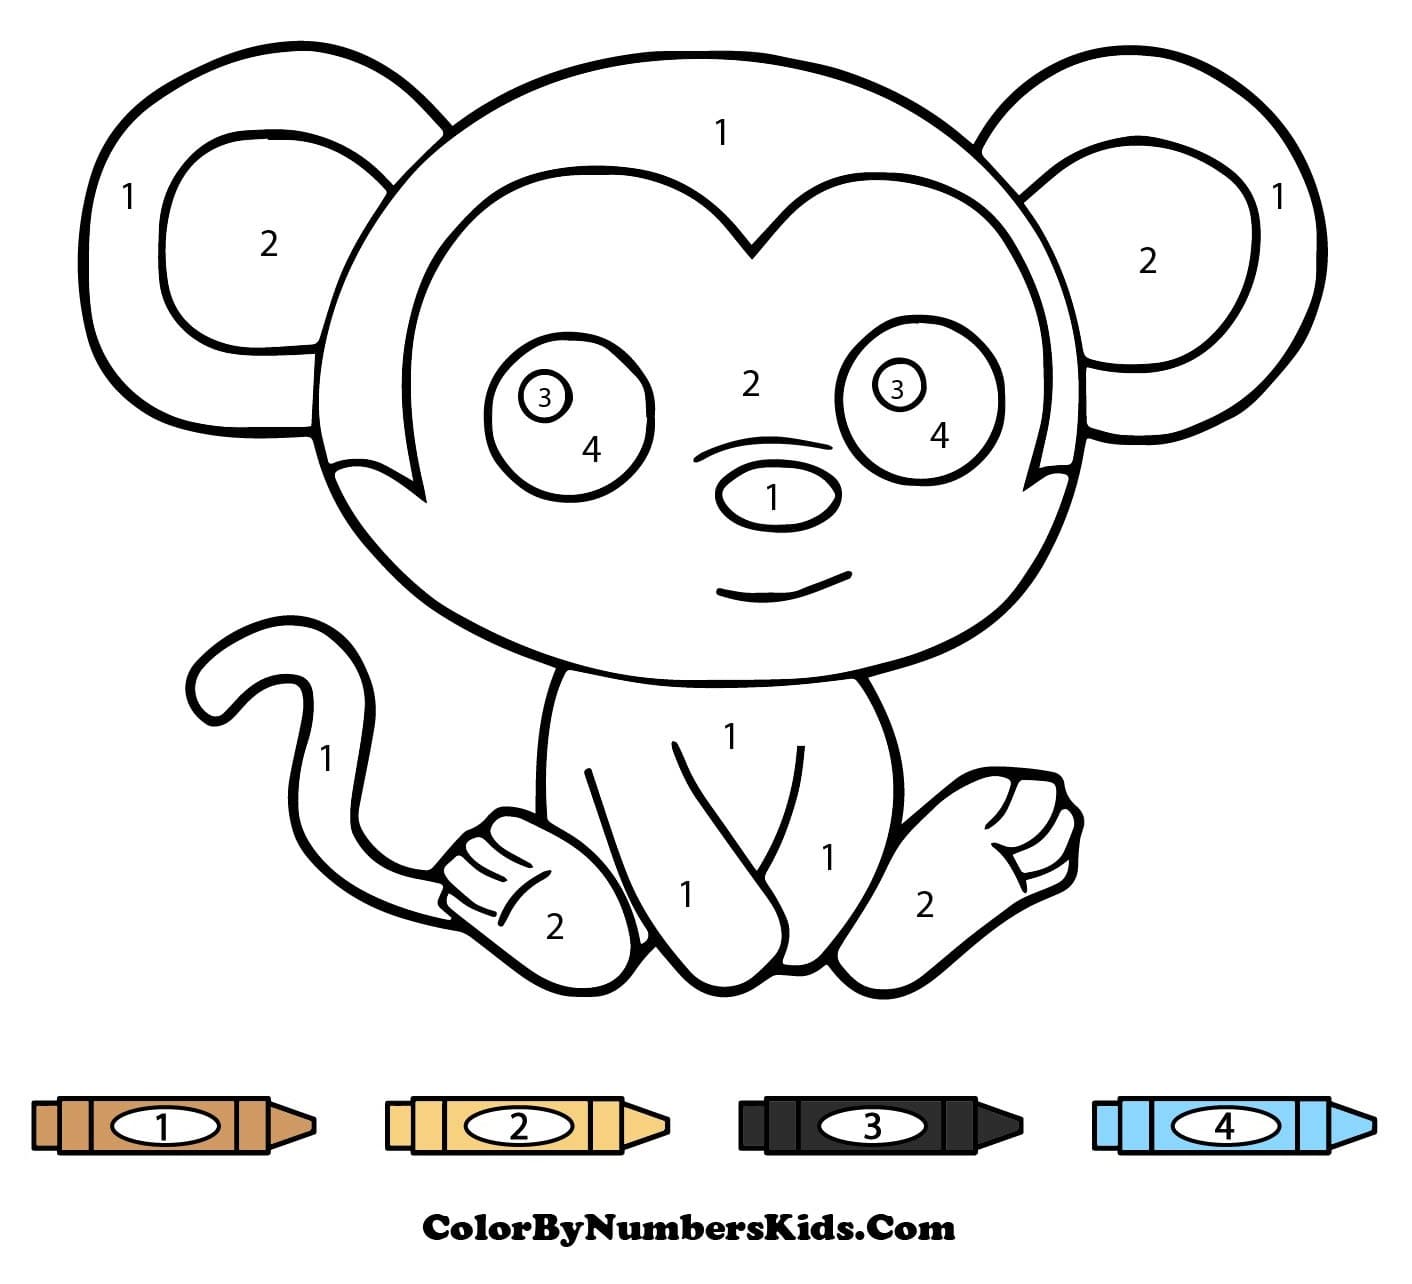 Cute Monkey Color By Number For Kids